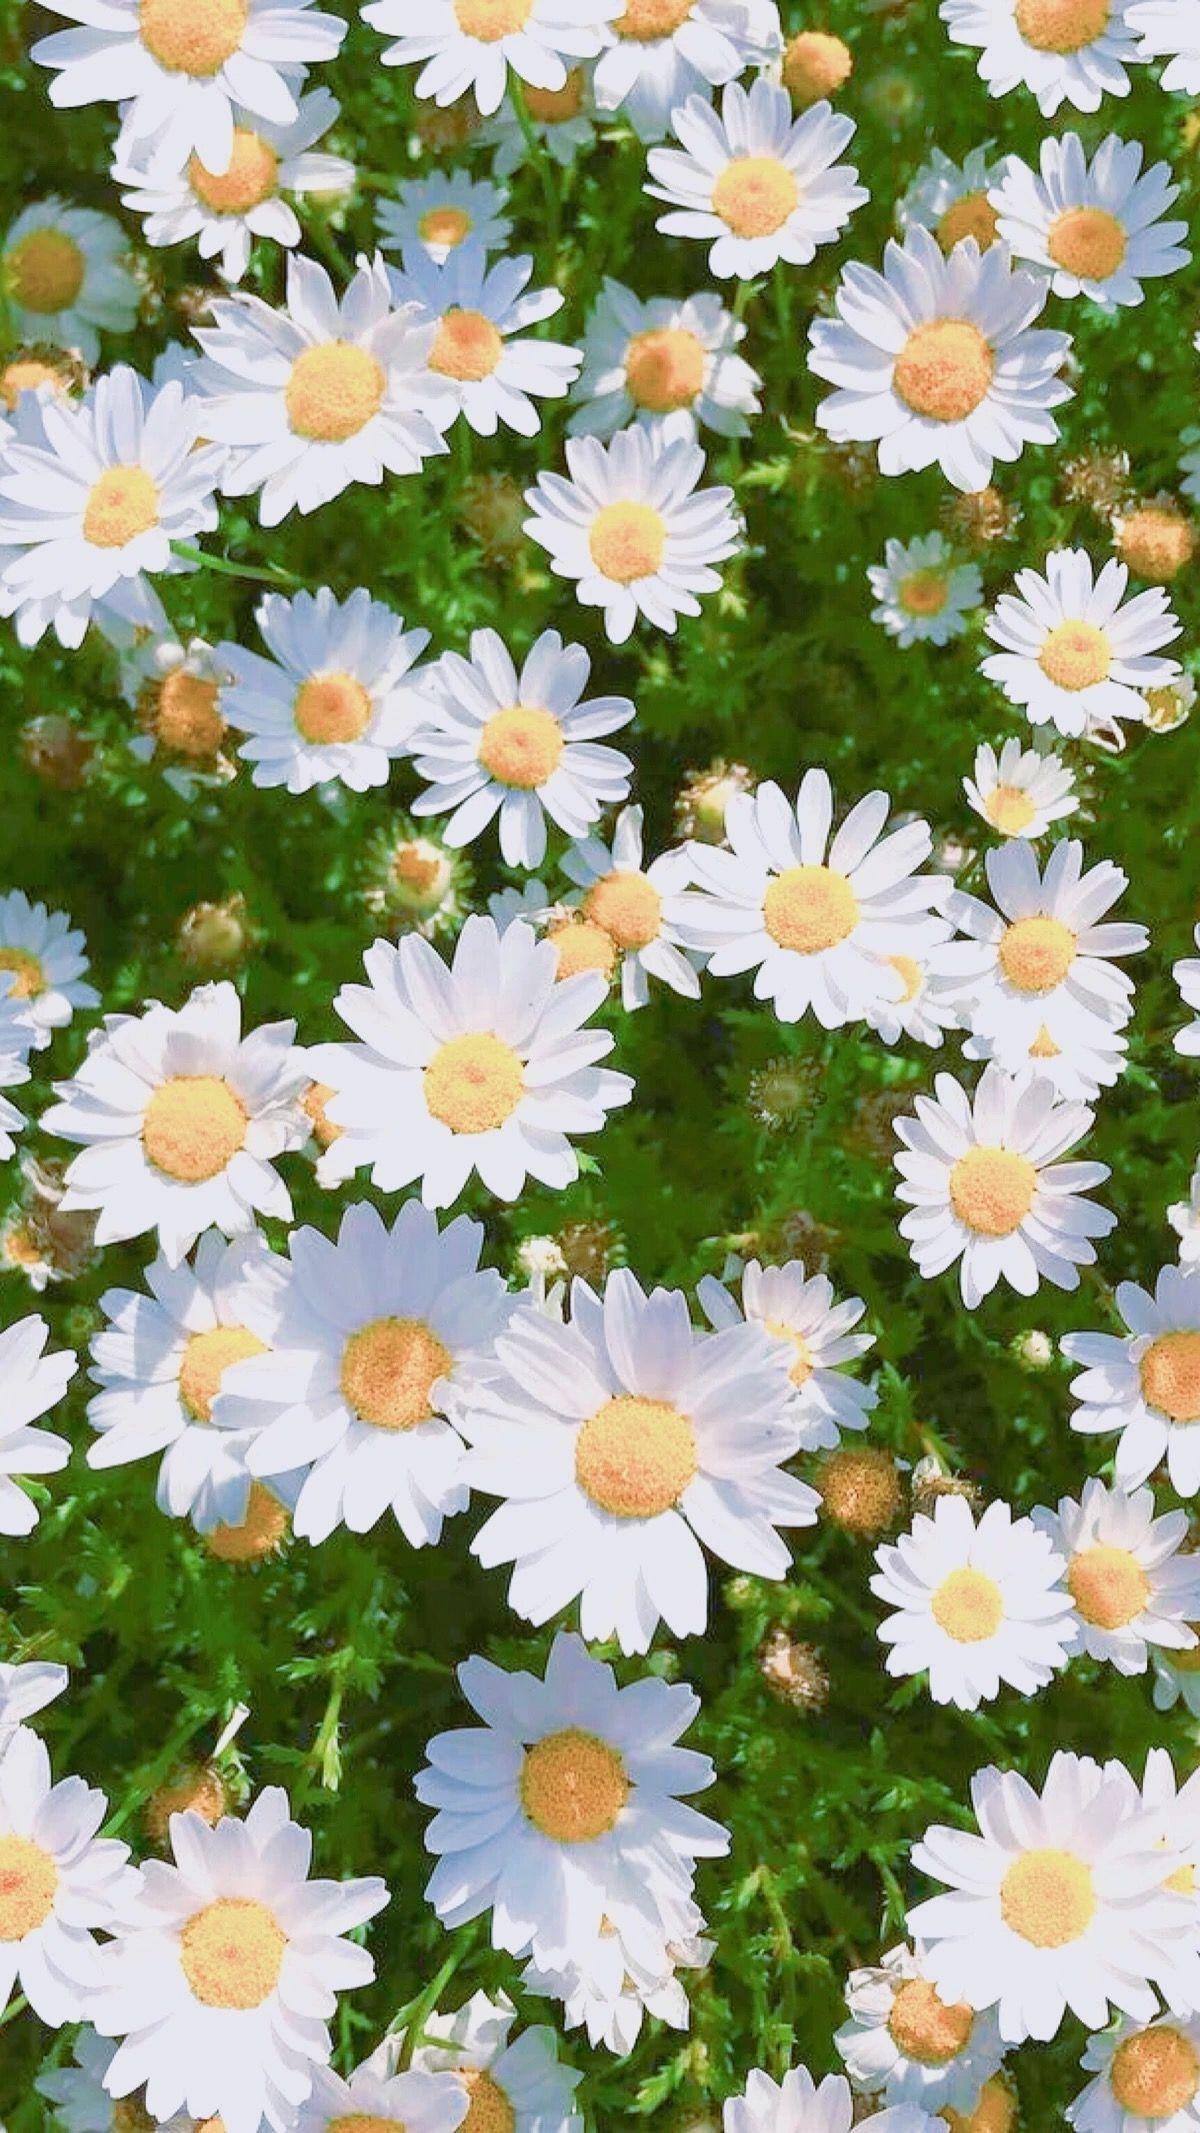 100+] Daisy Flower Wallpapers | Wallpapers.com